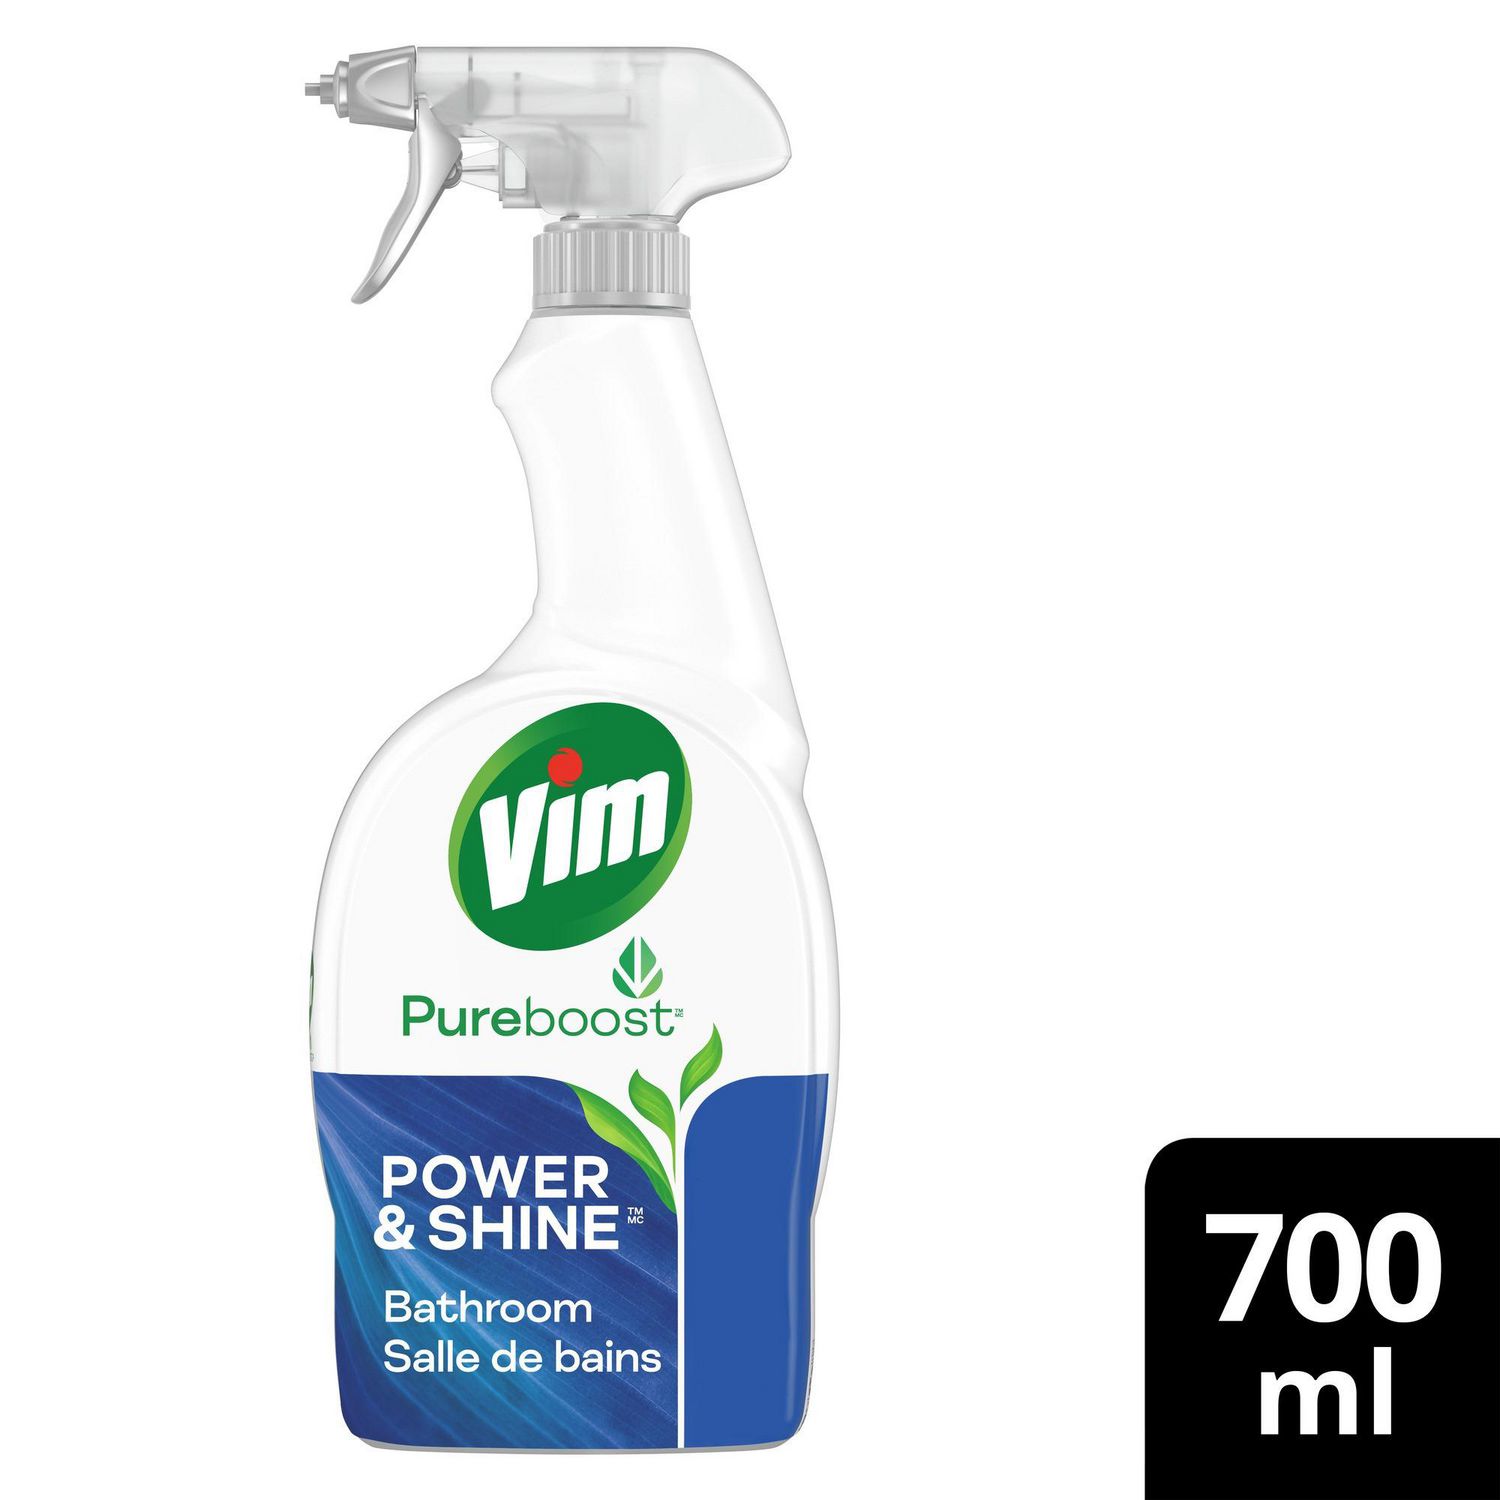 Vim Power & Shine Kitchen Cleaner For Tough Grease & Streak-Free Shine 100%  Naturally Derived Cleaning Agents 700 ml, 12 pack : : Health &  Personal Care